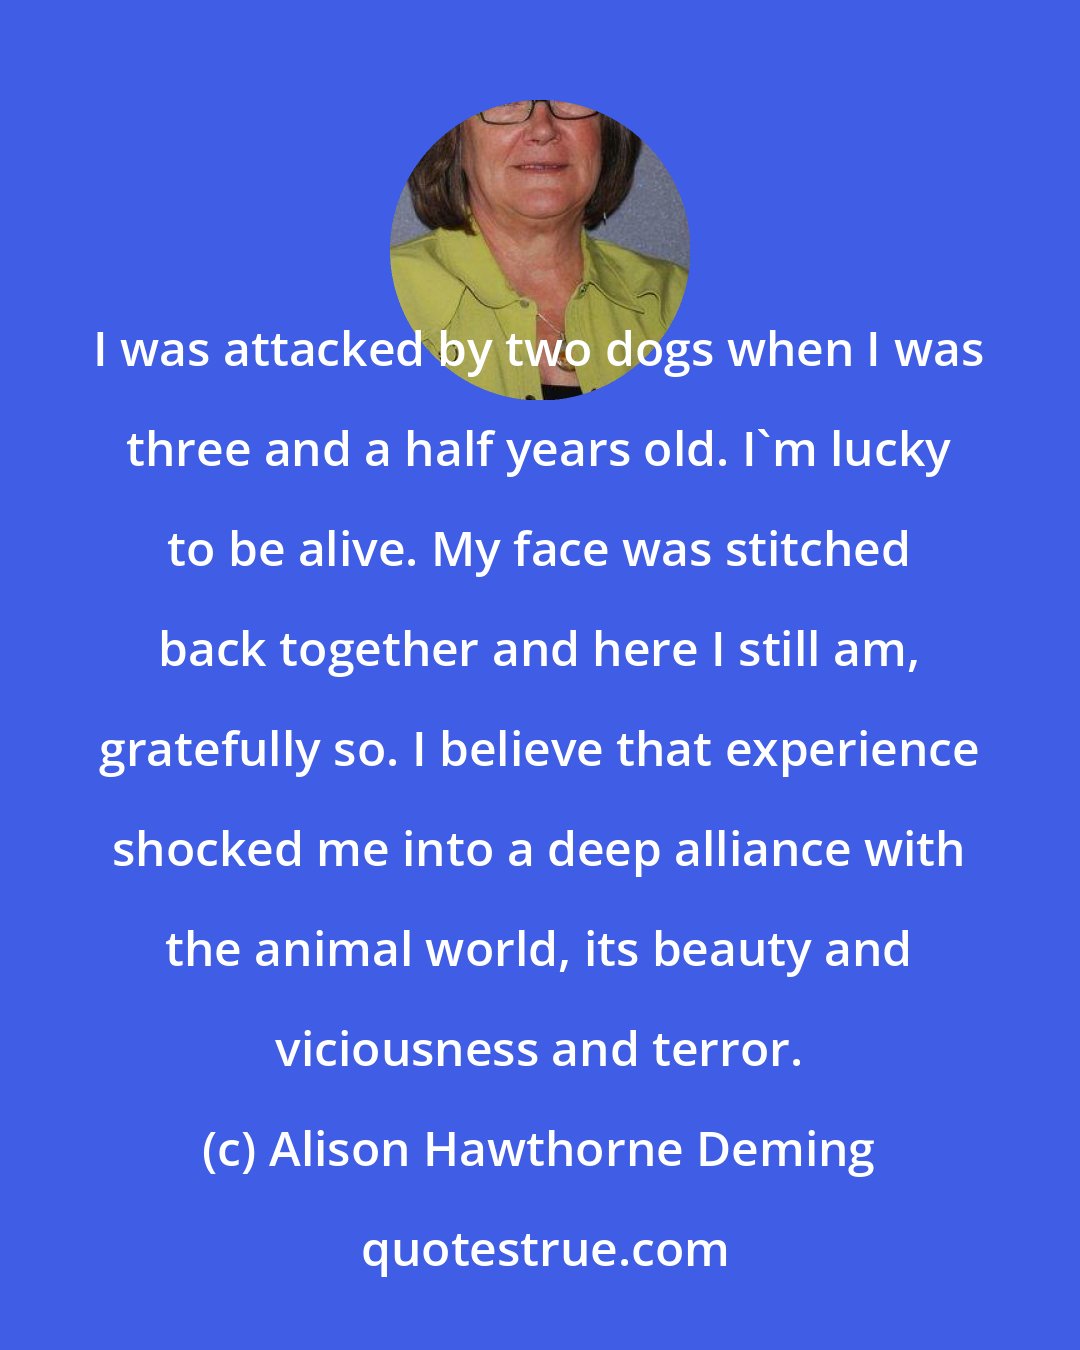 Alison Hawthorne Deming: I was attacked by two dogs when I was three and a half years old. I'm lucky to be alive. My face was stitched back together and here I still am, gratefully so. I believe that experience shocked me into a deep alliance with the animal world, its beauty and viciousness and terror.